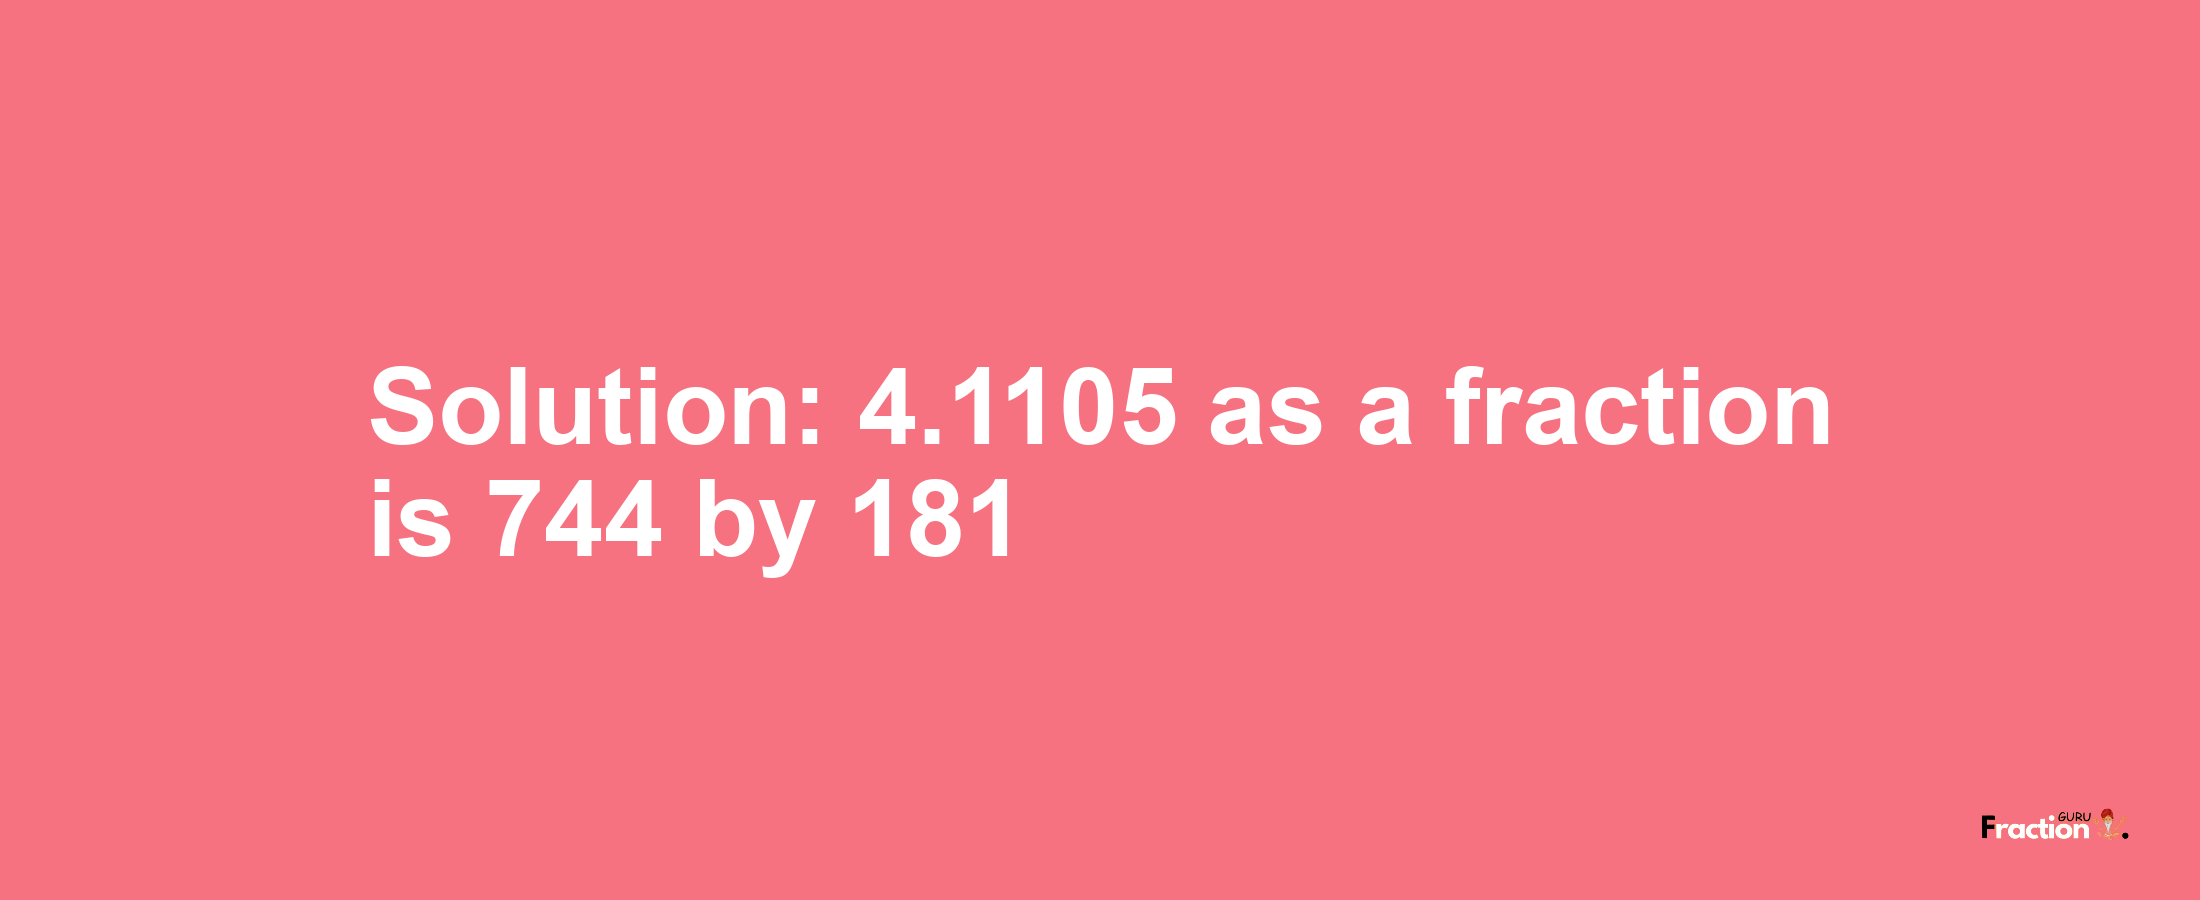 Solution:4.1105 as a fraction is 744/181